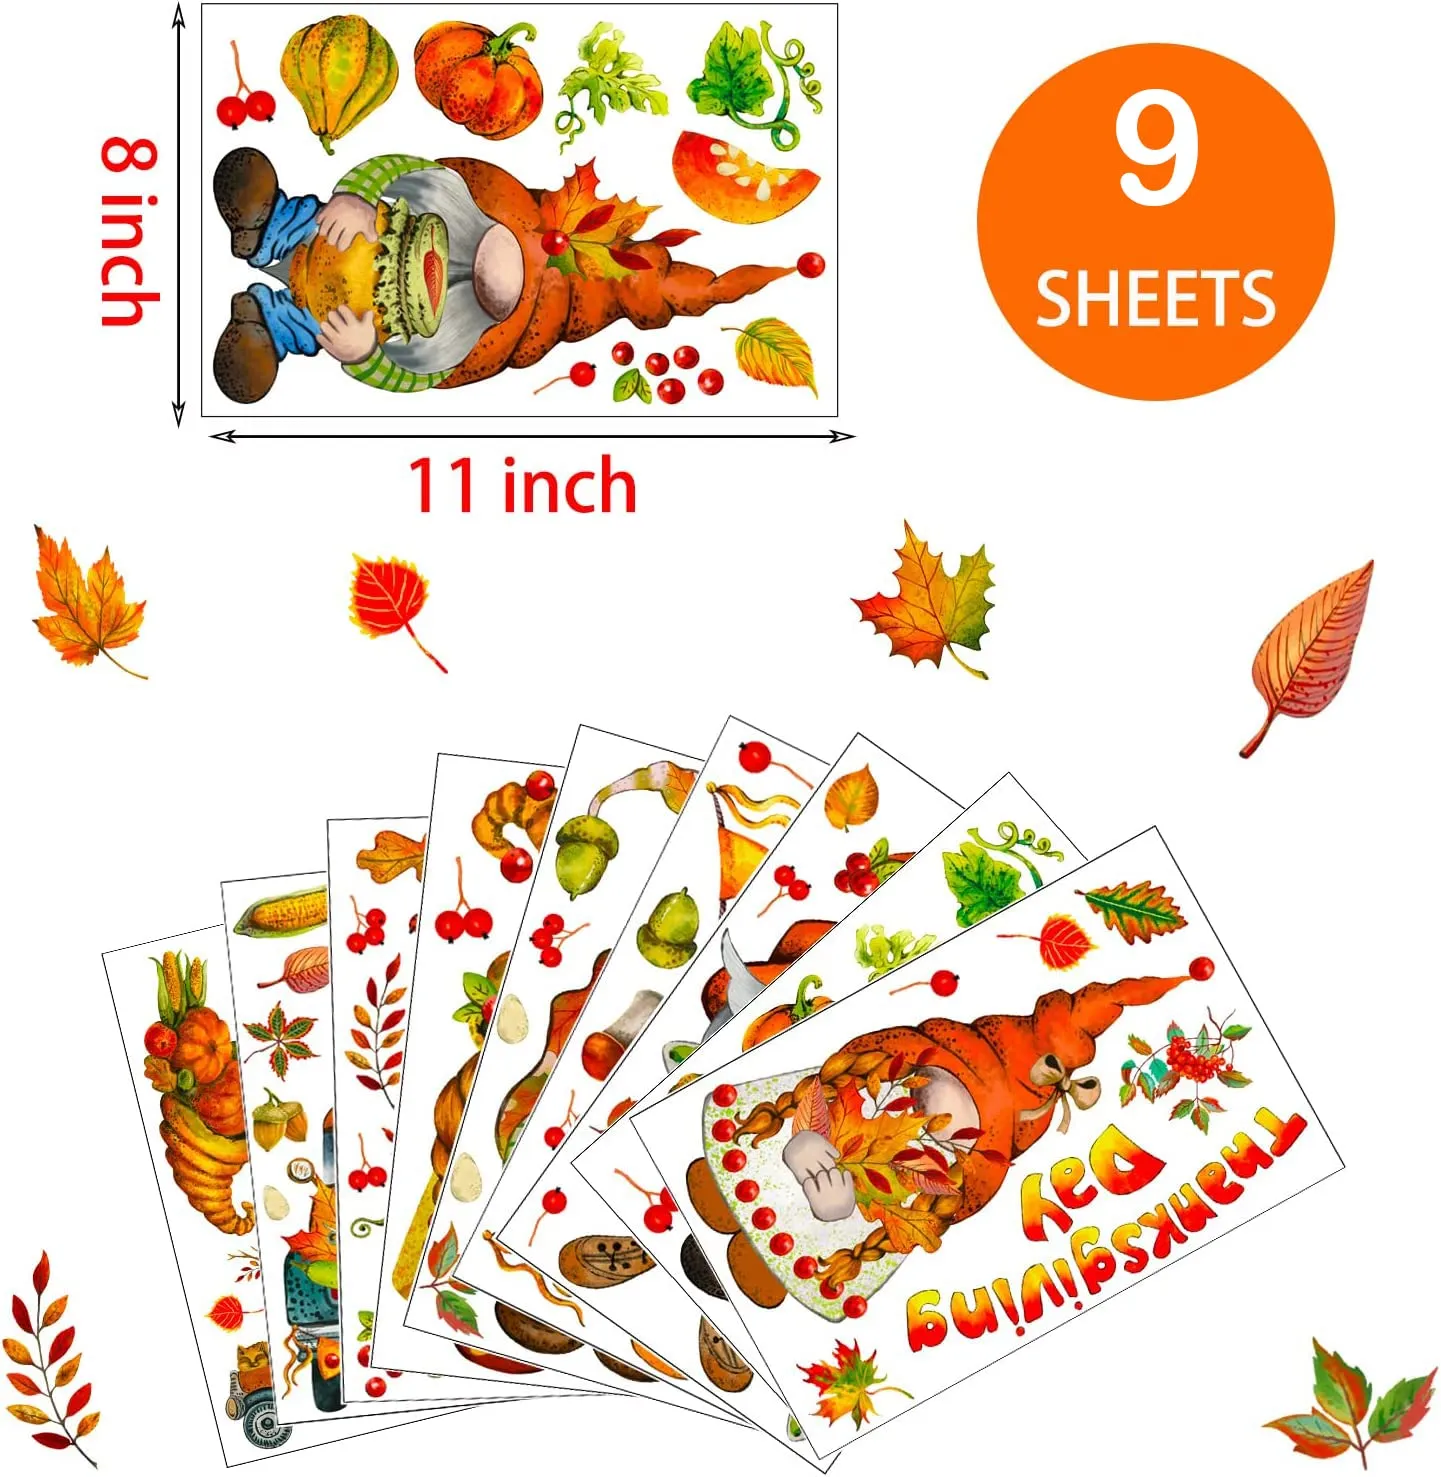 3ml fall window clings 9 sheets thanksgiving gnome window decals for glass windows autumn maple leaves for home decorations